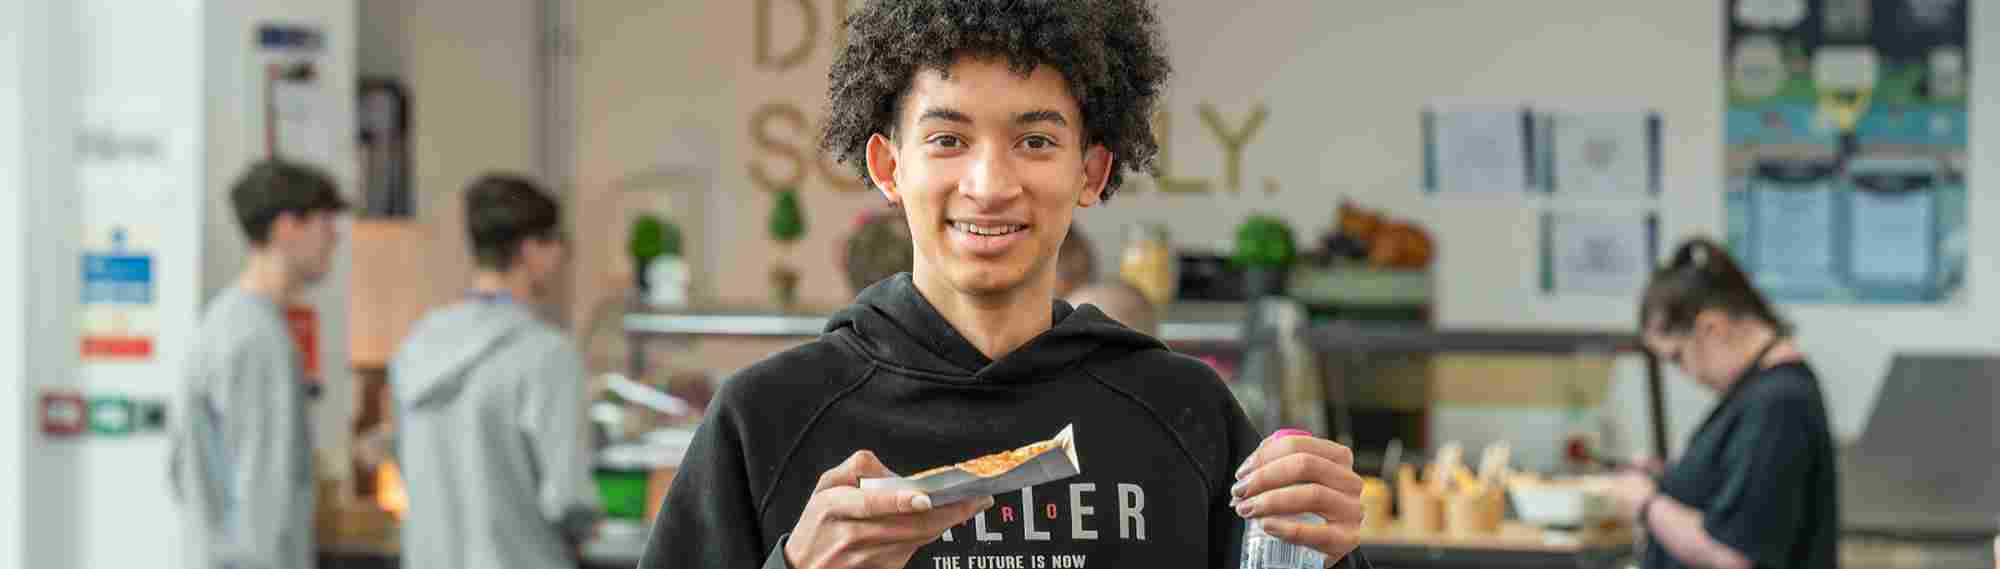 Oakwood Academy Sixth Form pupil in college canteen